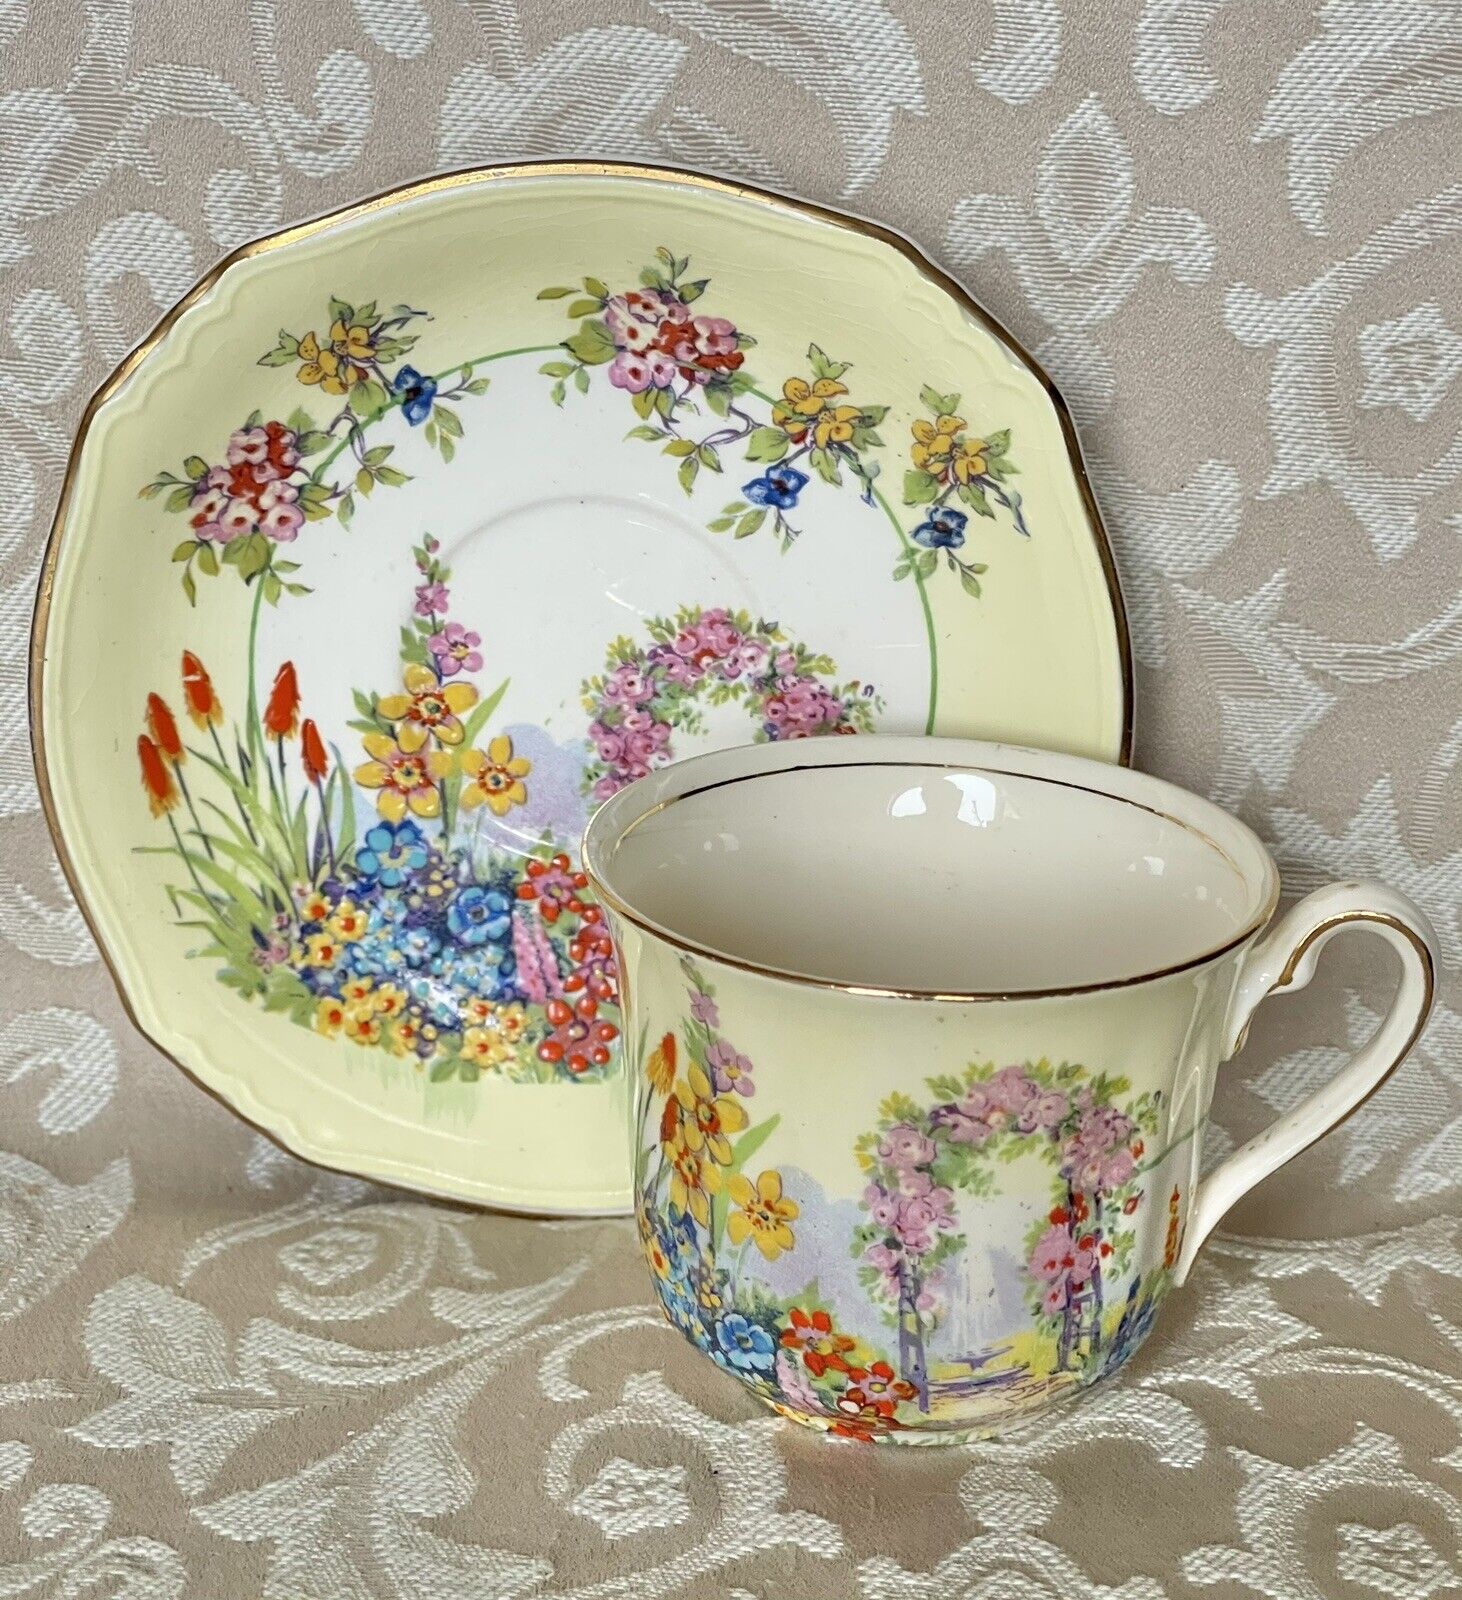 Antique Royal Windsor Garden Trellis Hand Painted Demitasse Cup And Saucer. Rare